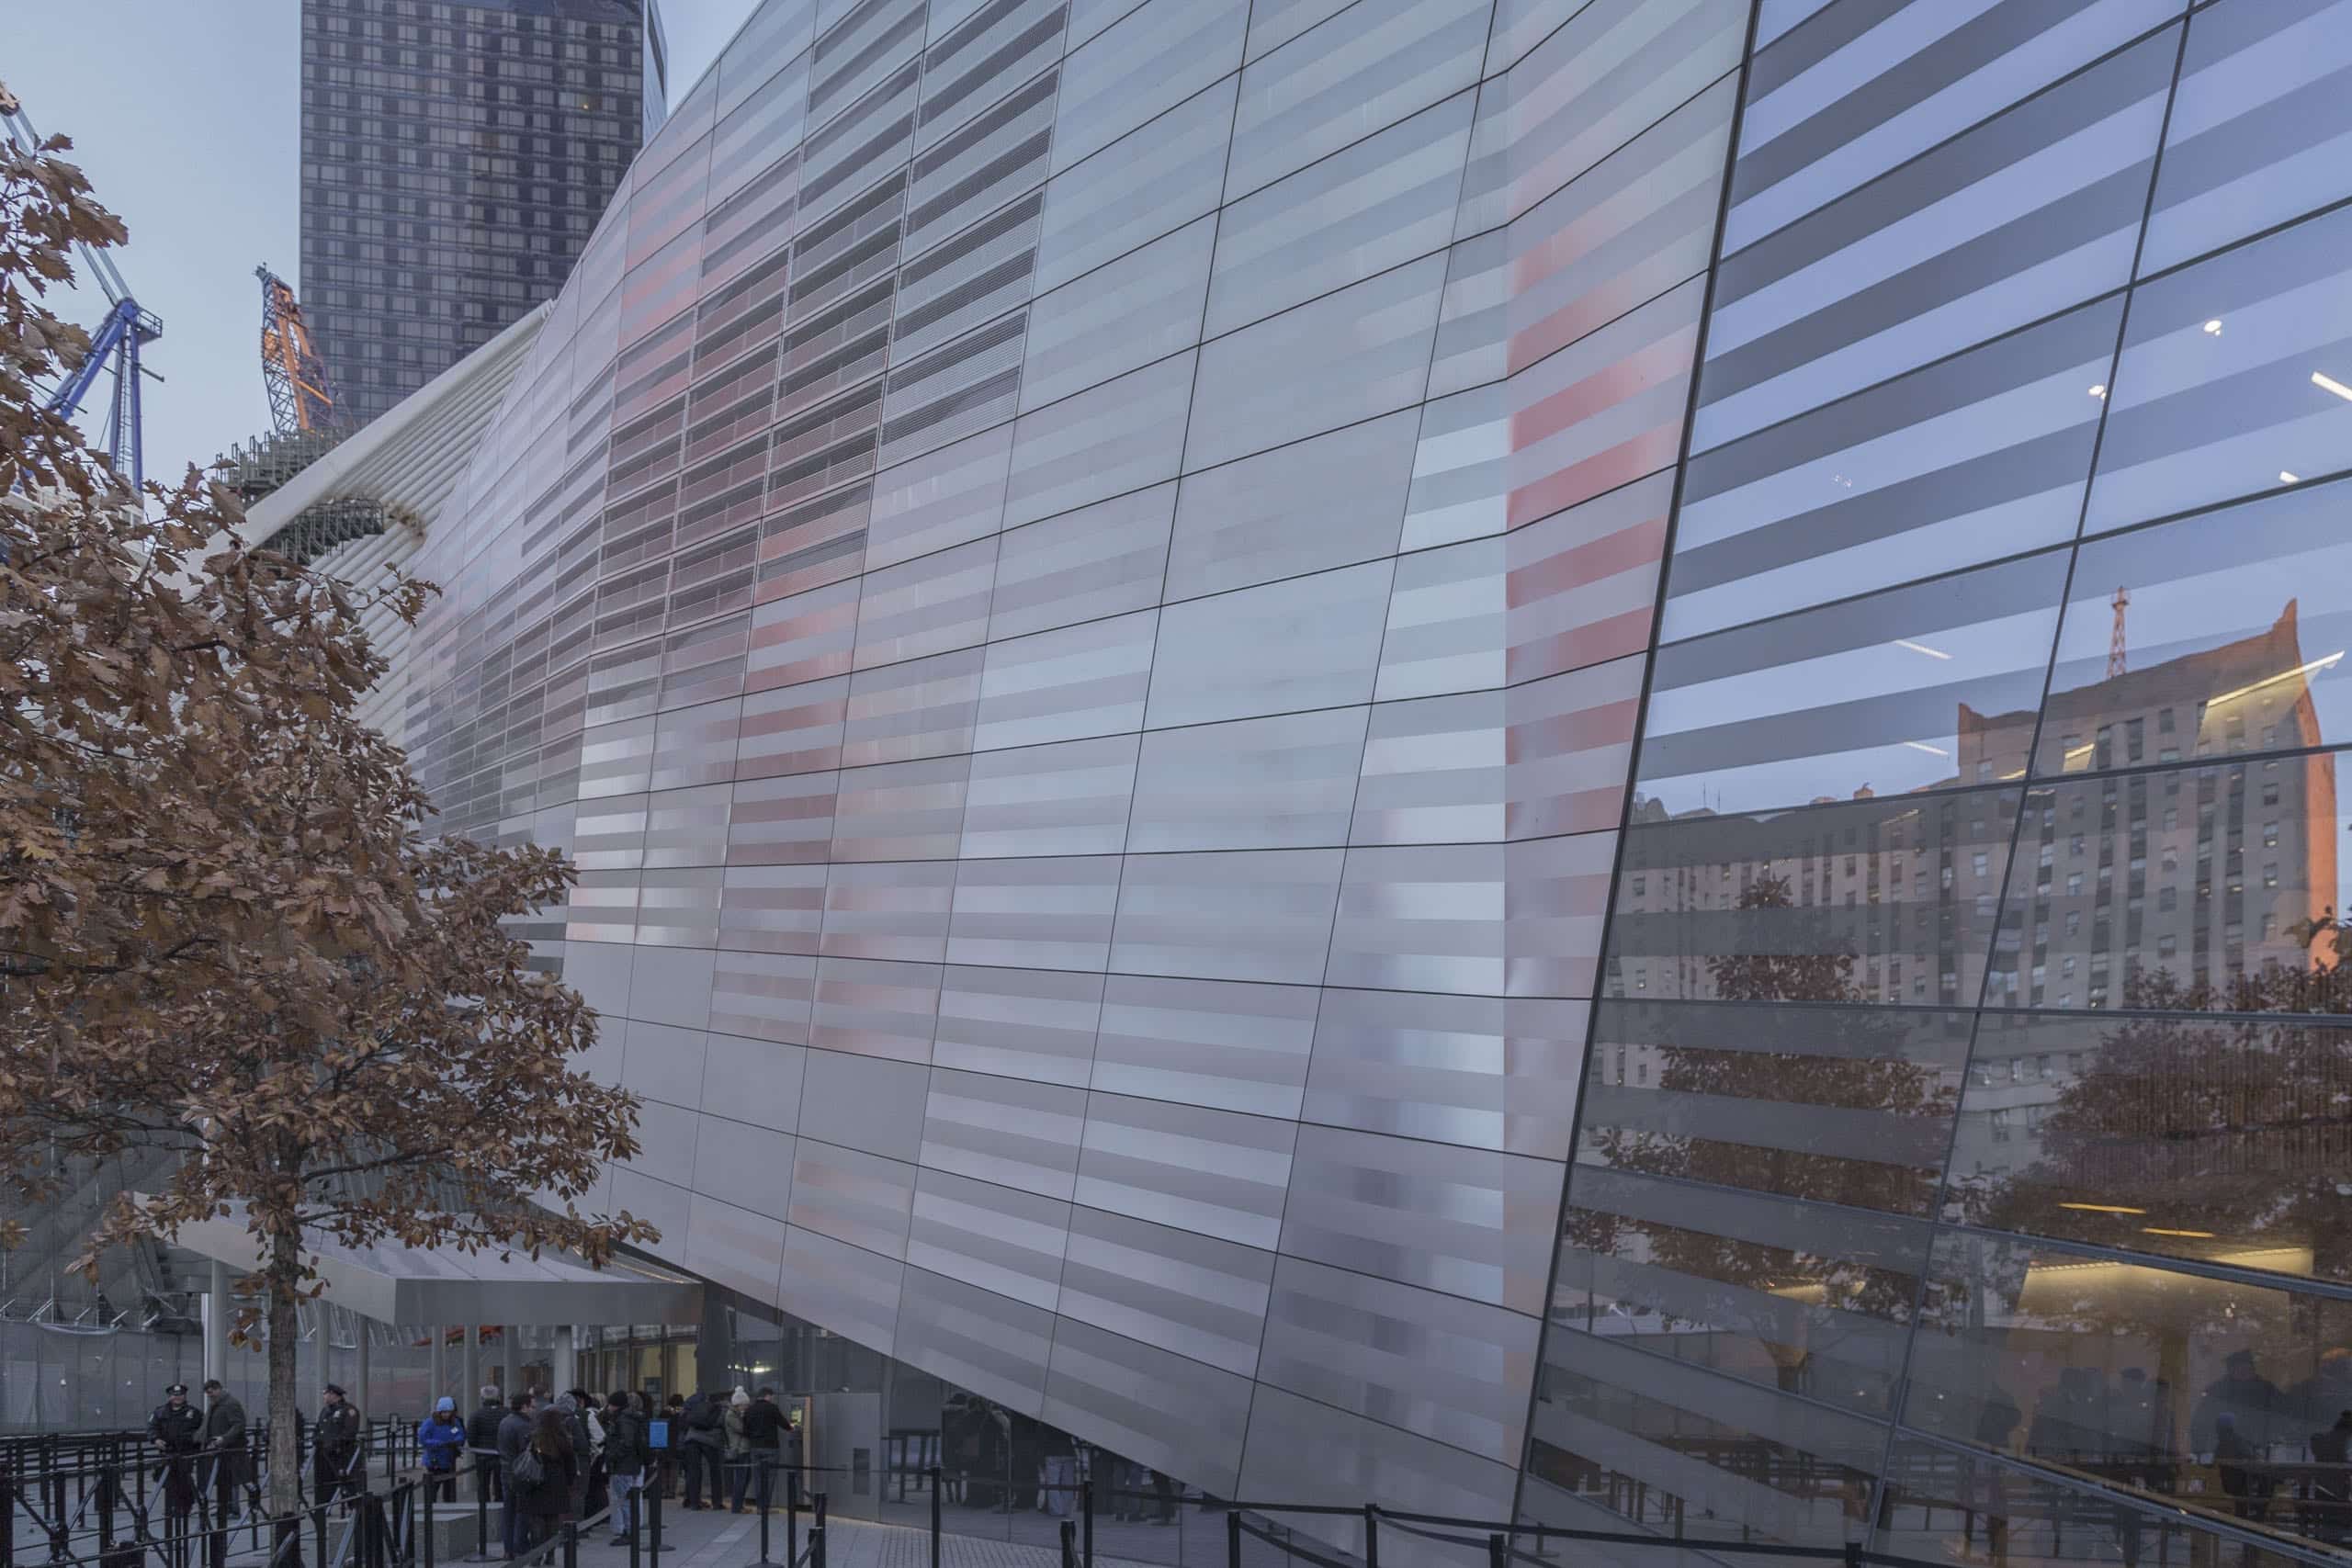 STRIATING STAINLESS STEEL PANEL SYSTEM USED ON THE 911 MUSEUM FACADE.